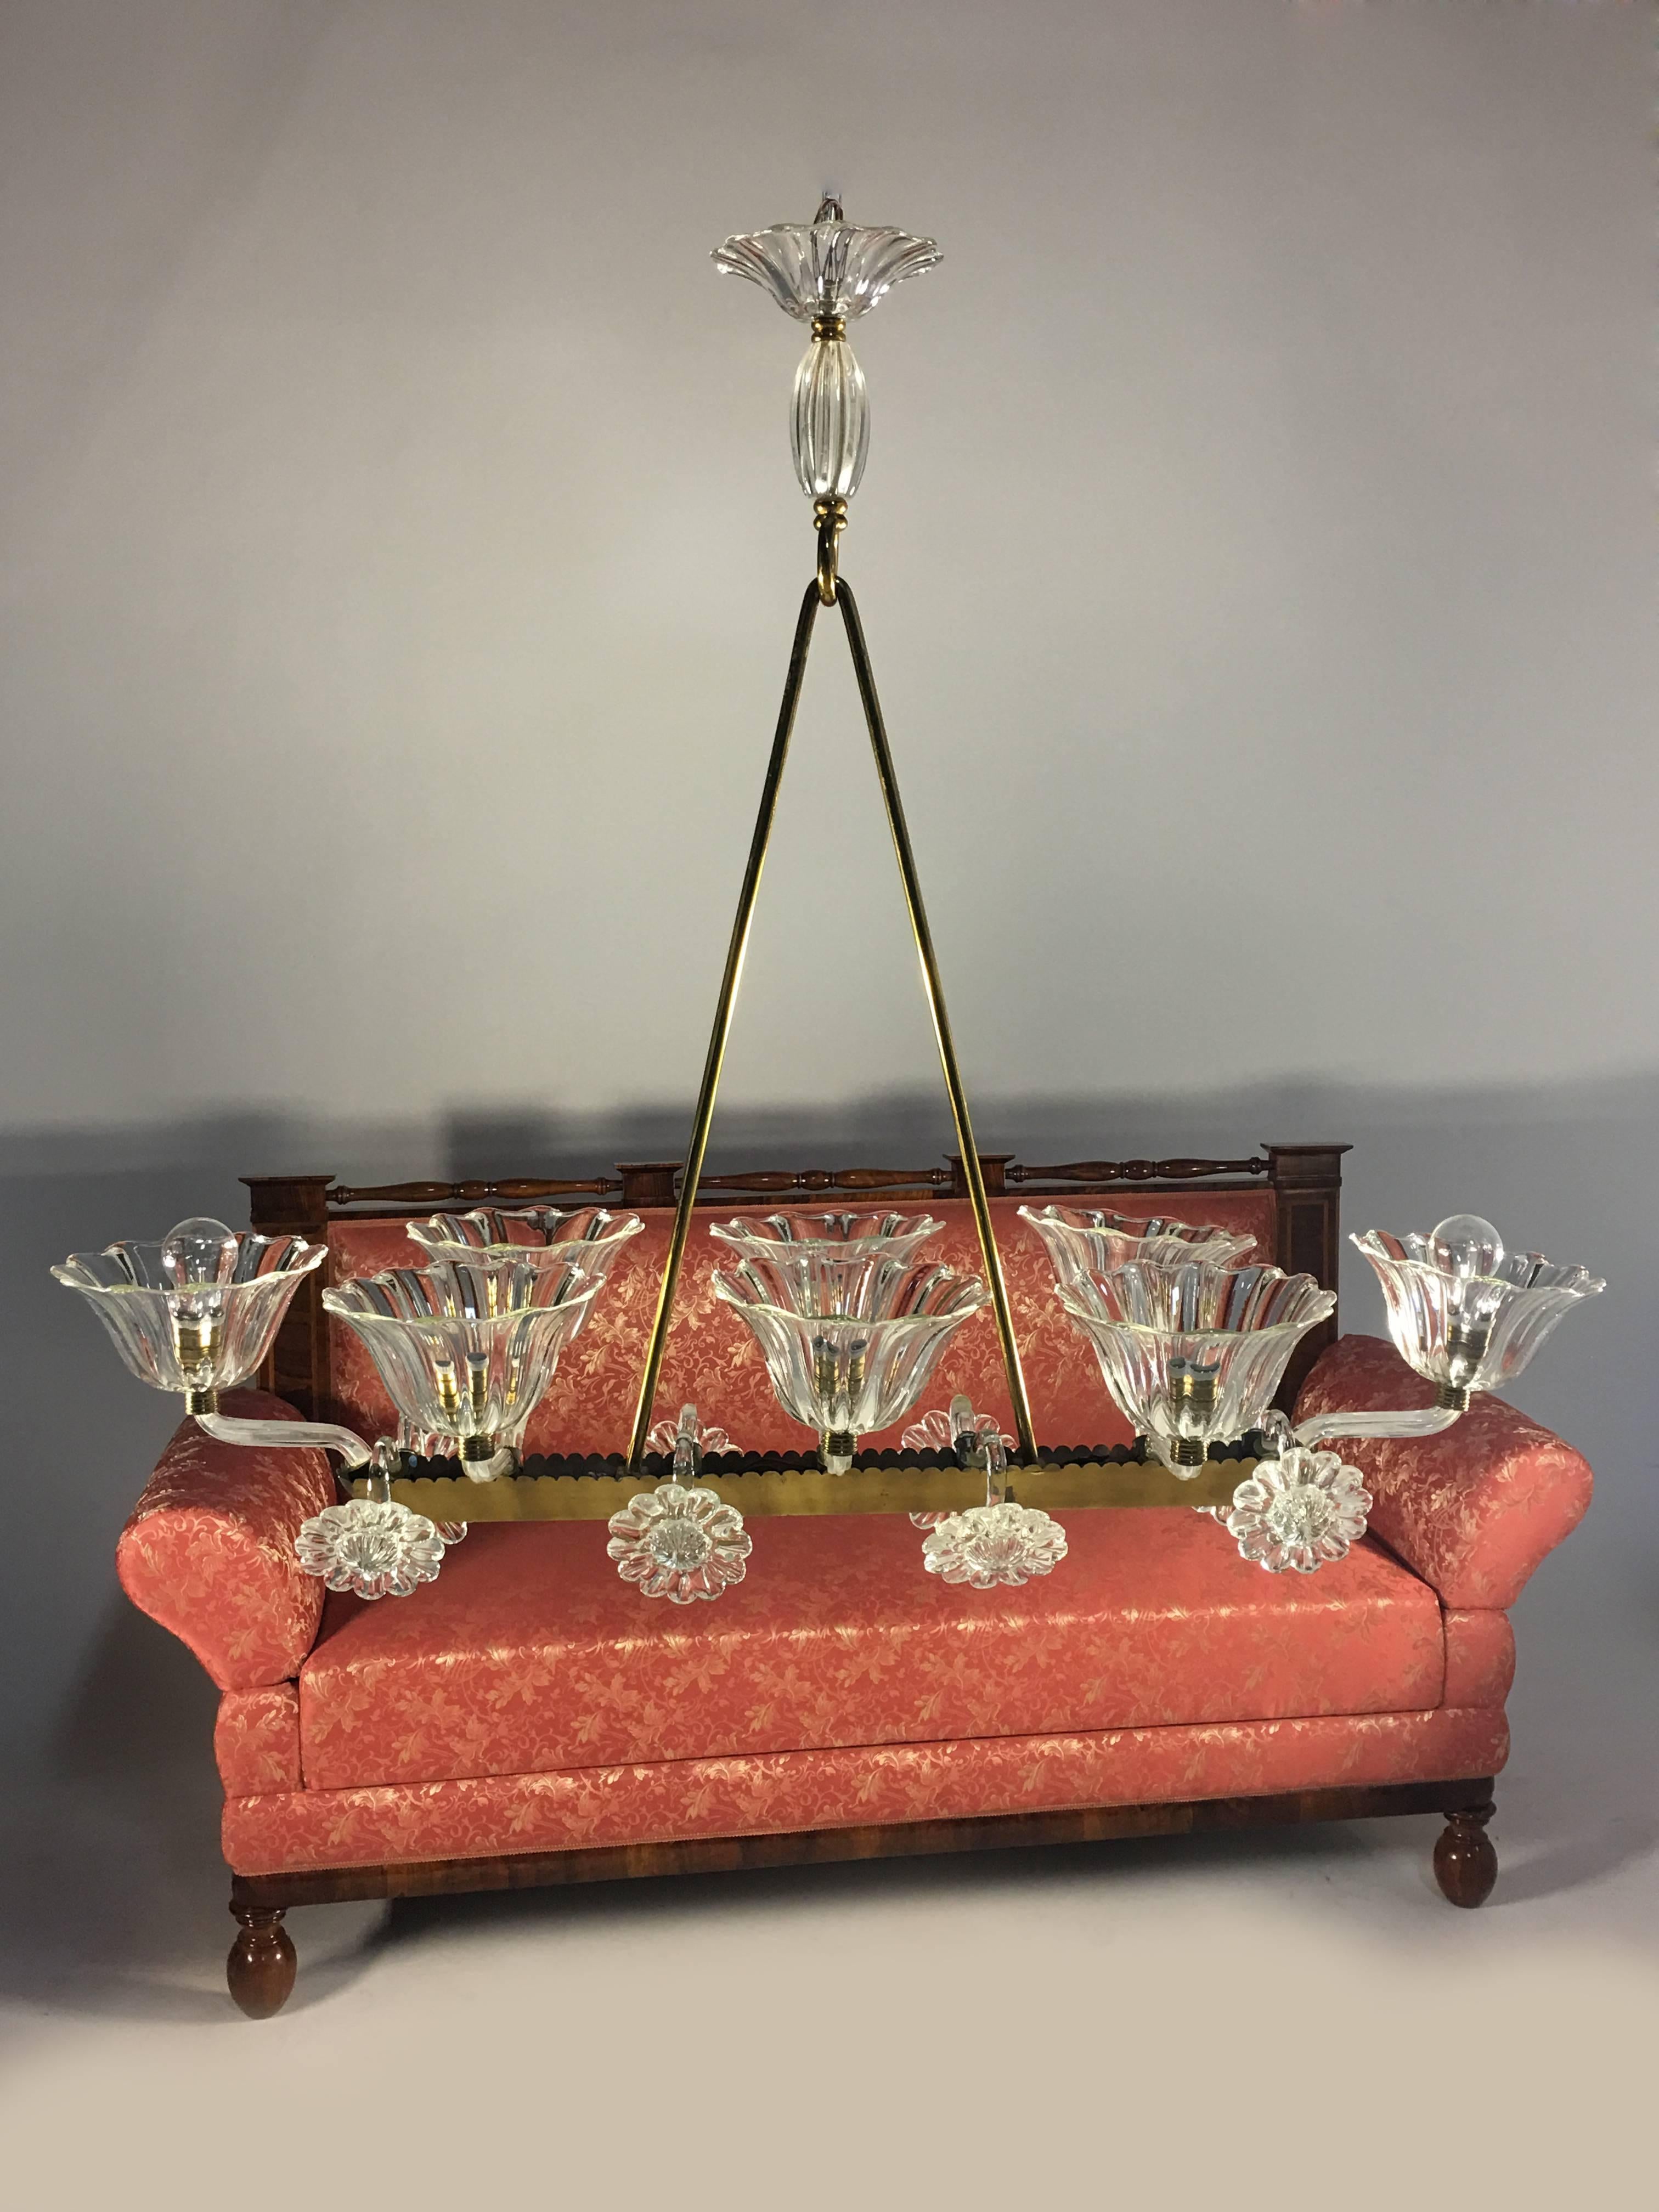 20th Century Amazing Liberty Chandelier by Ercole Barovier, Murano, 1940s For Sale